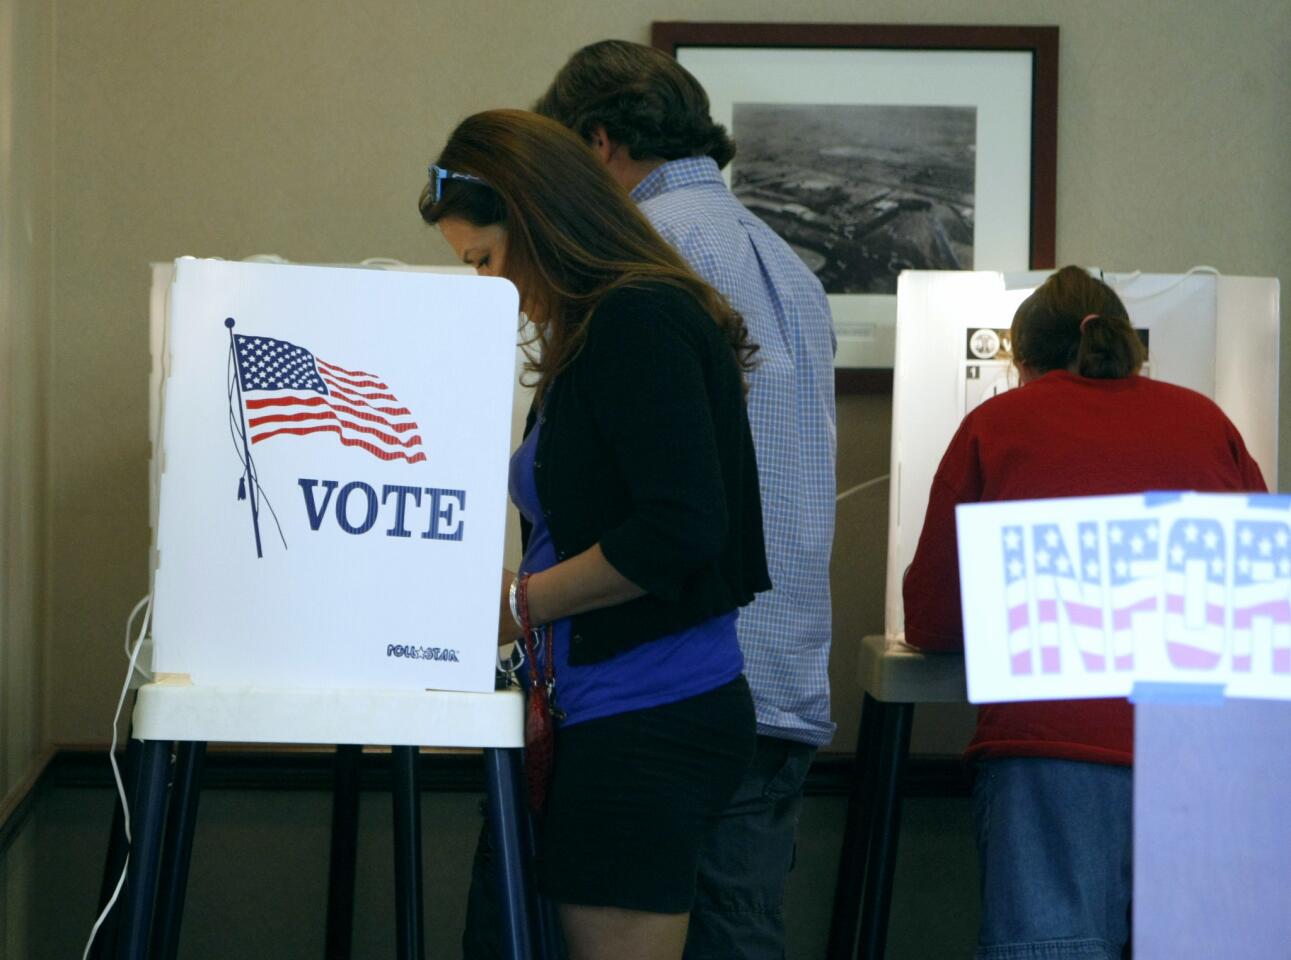 Photo Gallery: Voting at the Buena Vista Library in Burbank